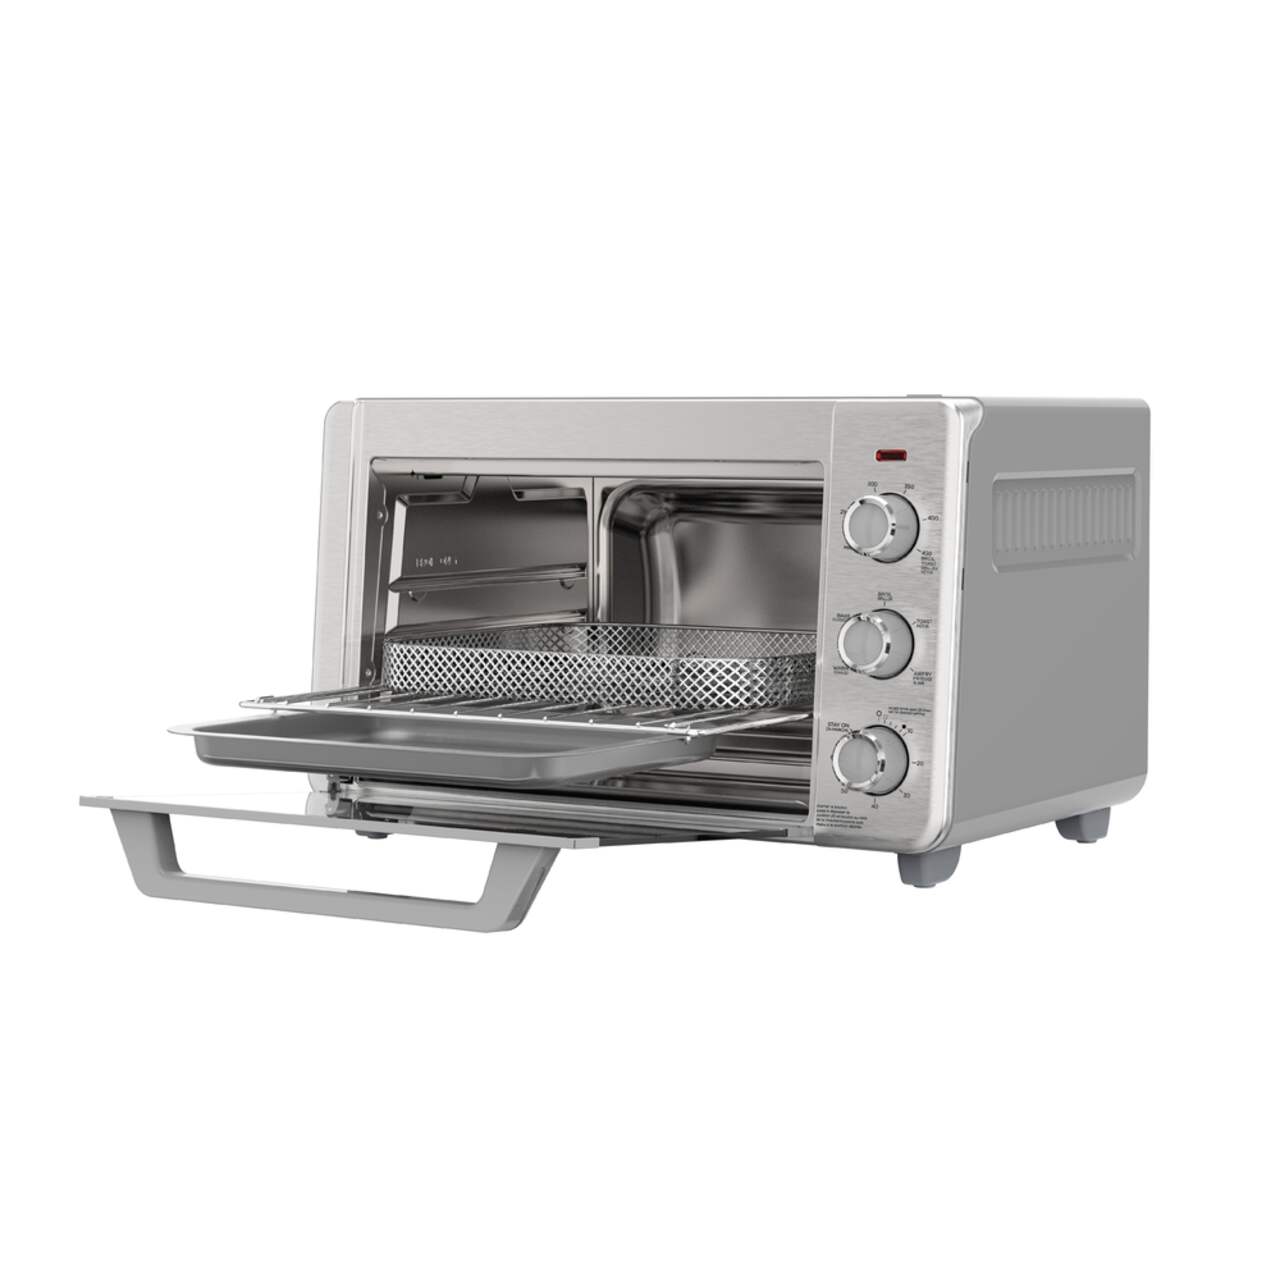 https://media-www.canadiantire.ca/product/living/kitchen/kitchen-appliances/0430146/black-decker-crisp-n-bake-6-slice-air-fry-toaster-oven-f2eee10d-d9ff-45d2-a6e6-214d1119afbb.png?imdensity=1&imwidth=1244&impolicy=mZoom